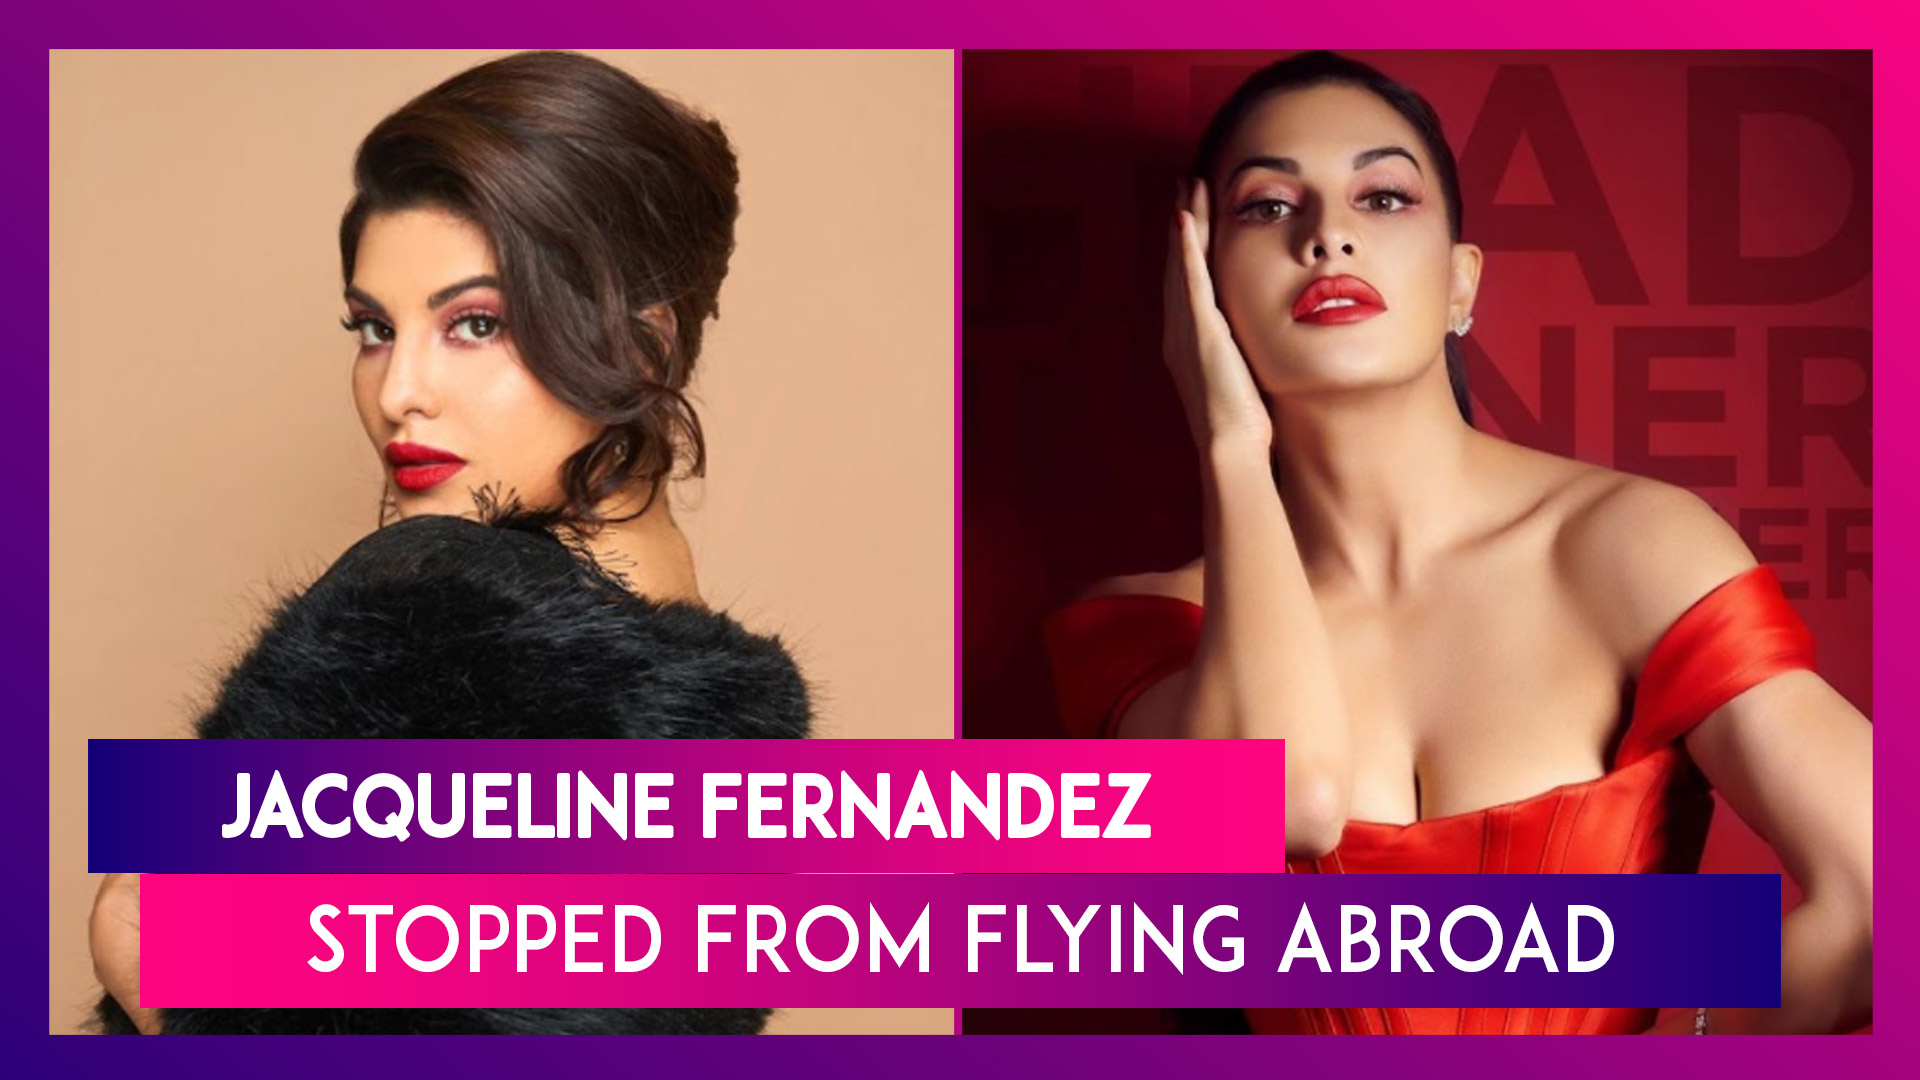 Jacqueline Fernandez Sex - Jacqueline Fernandez, Bollywood Star Stopped From Flying Abroad | ðŸ“¹ Watch  Videos From LatestLY